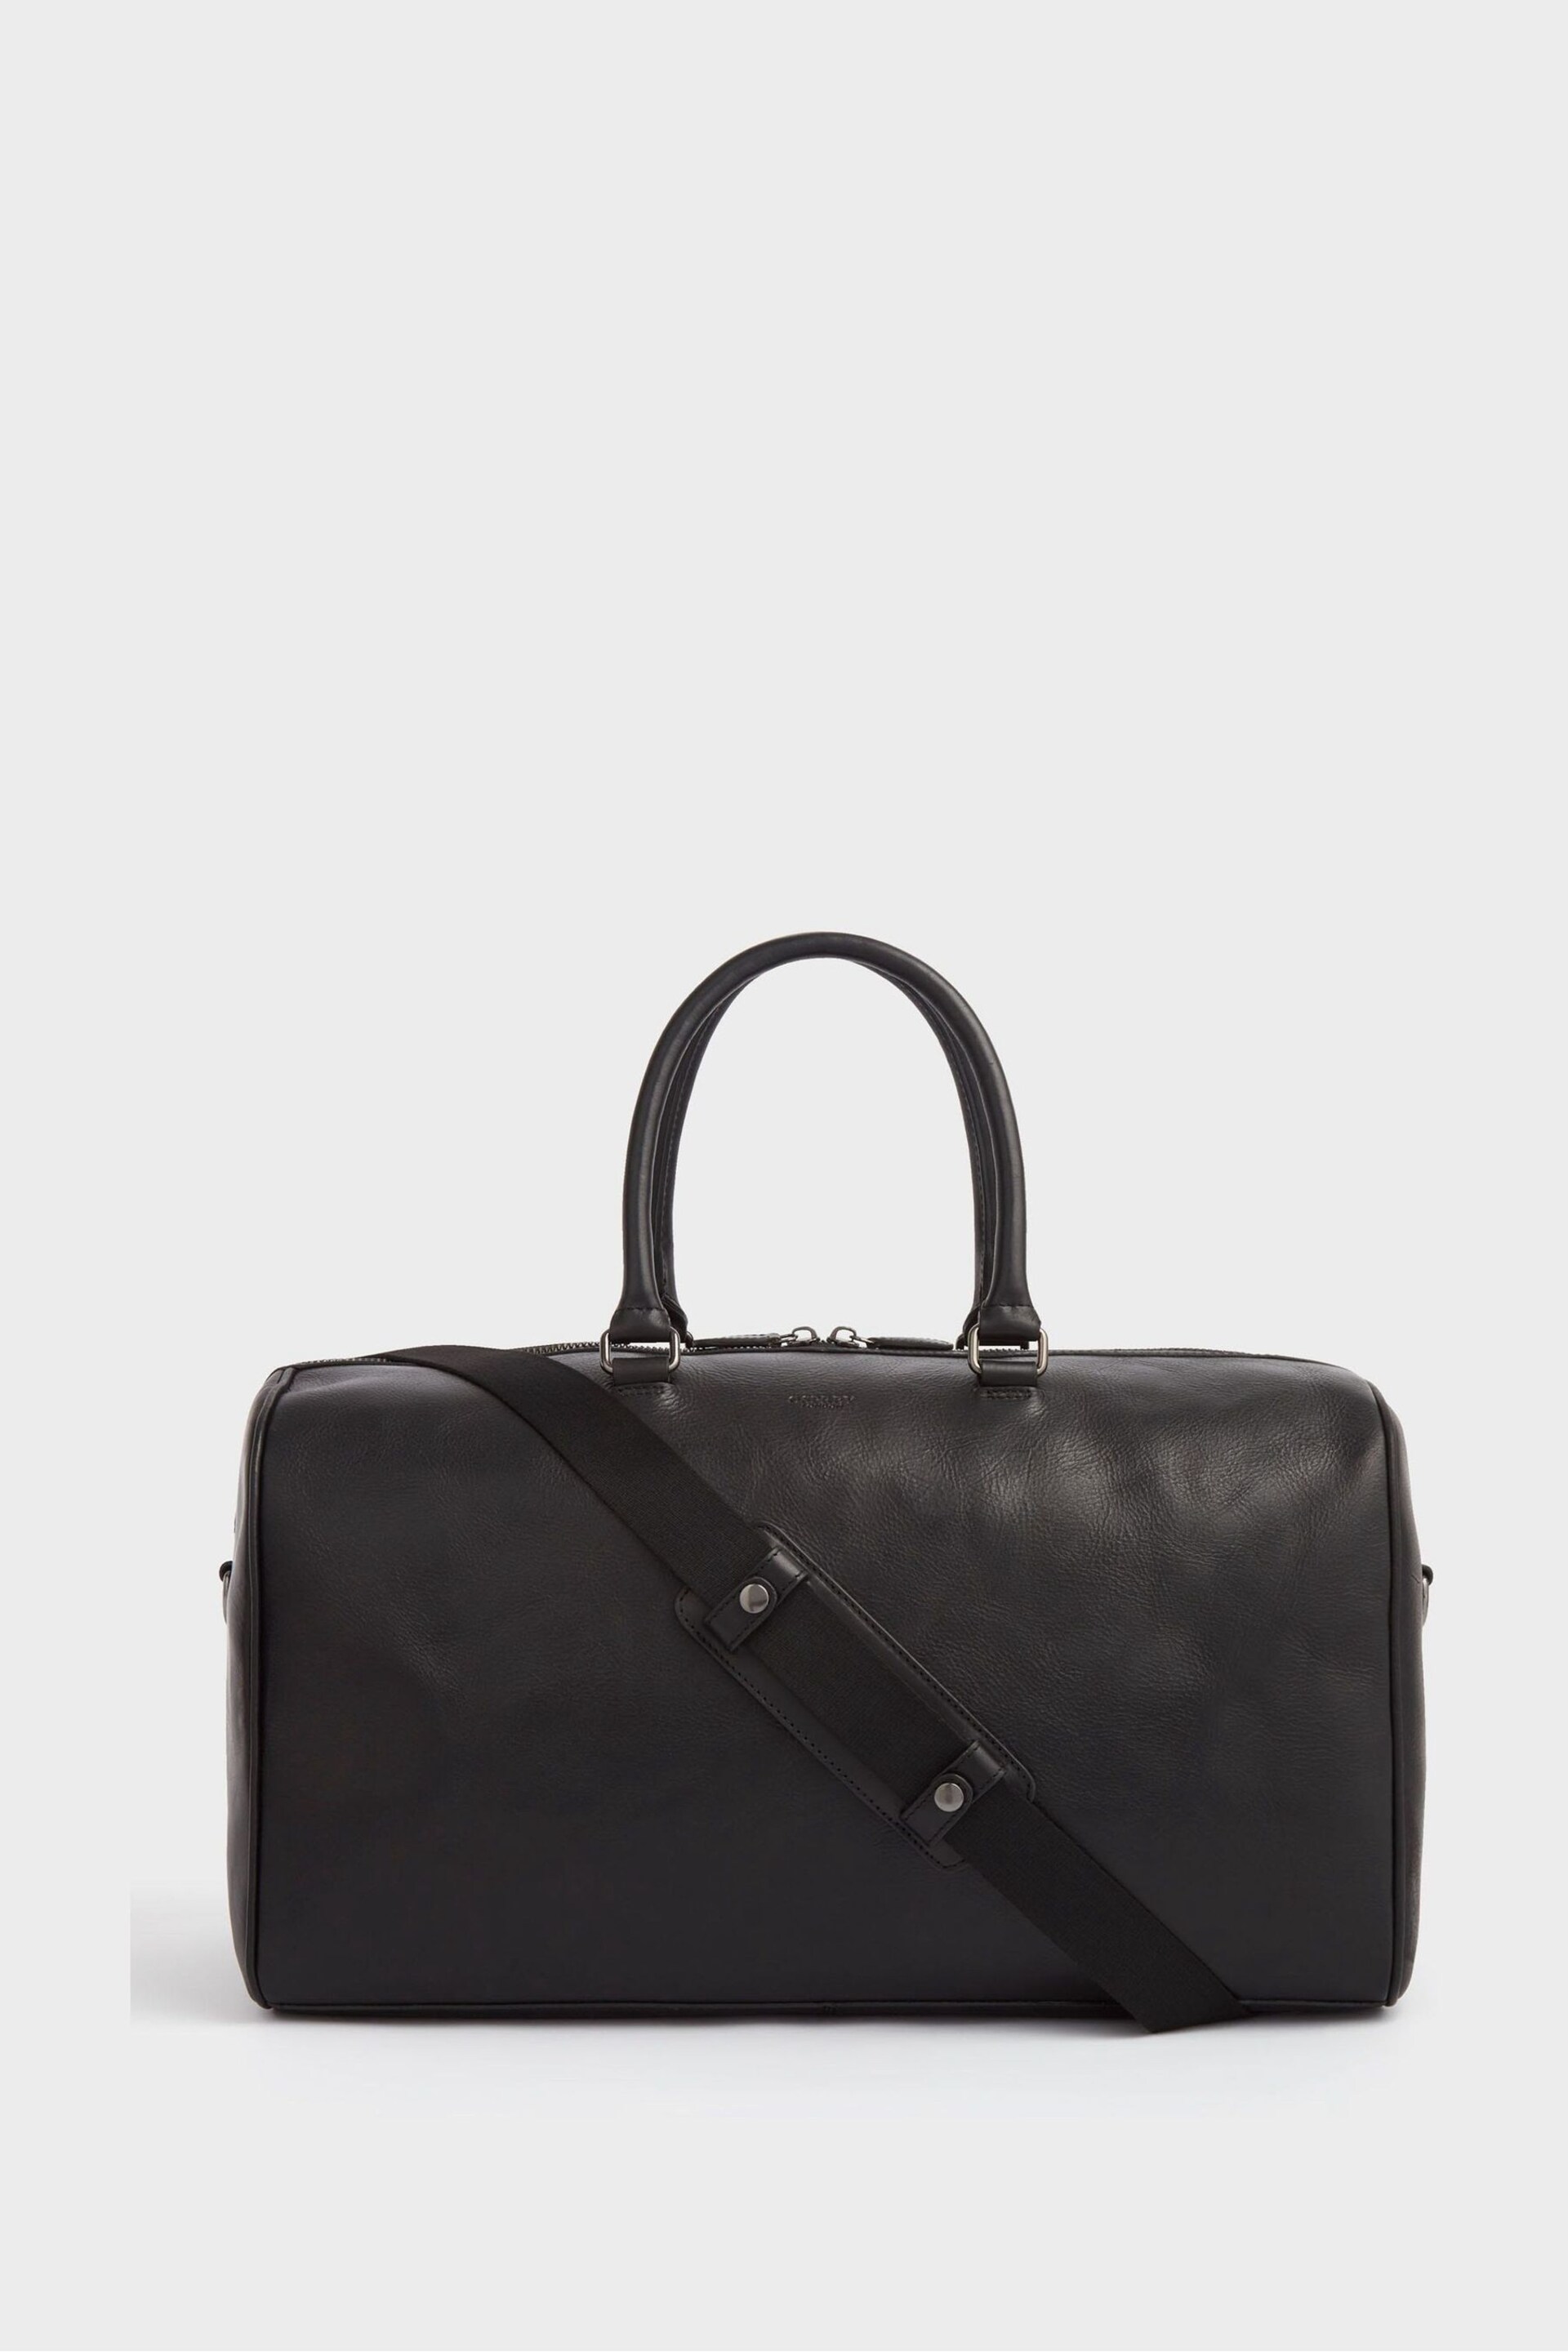 OSPREY LONDON The Carter Leather Weekend Holdall Bag - Image 1 of 5